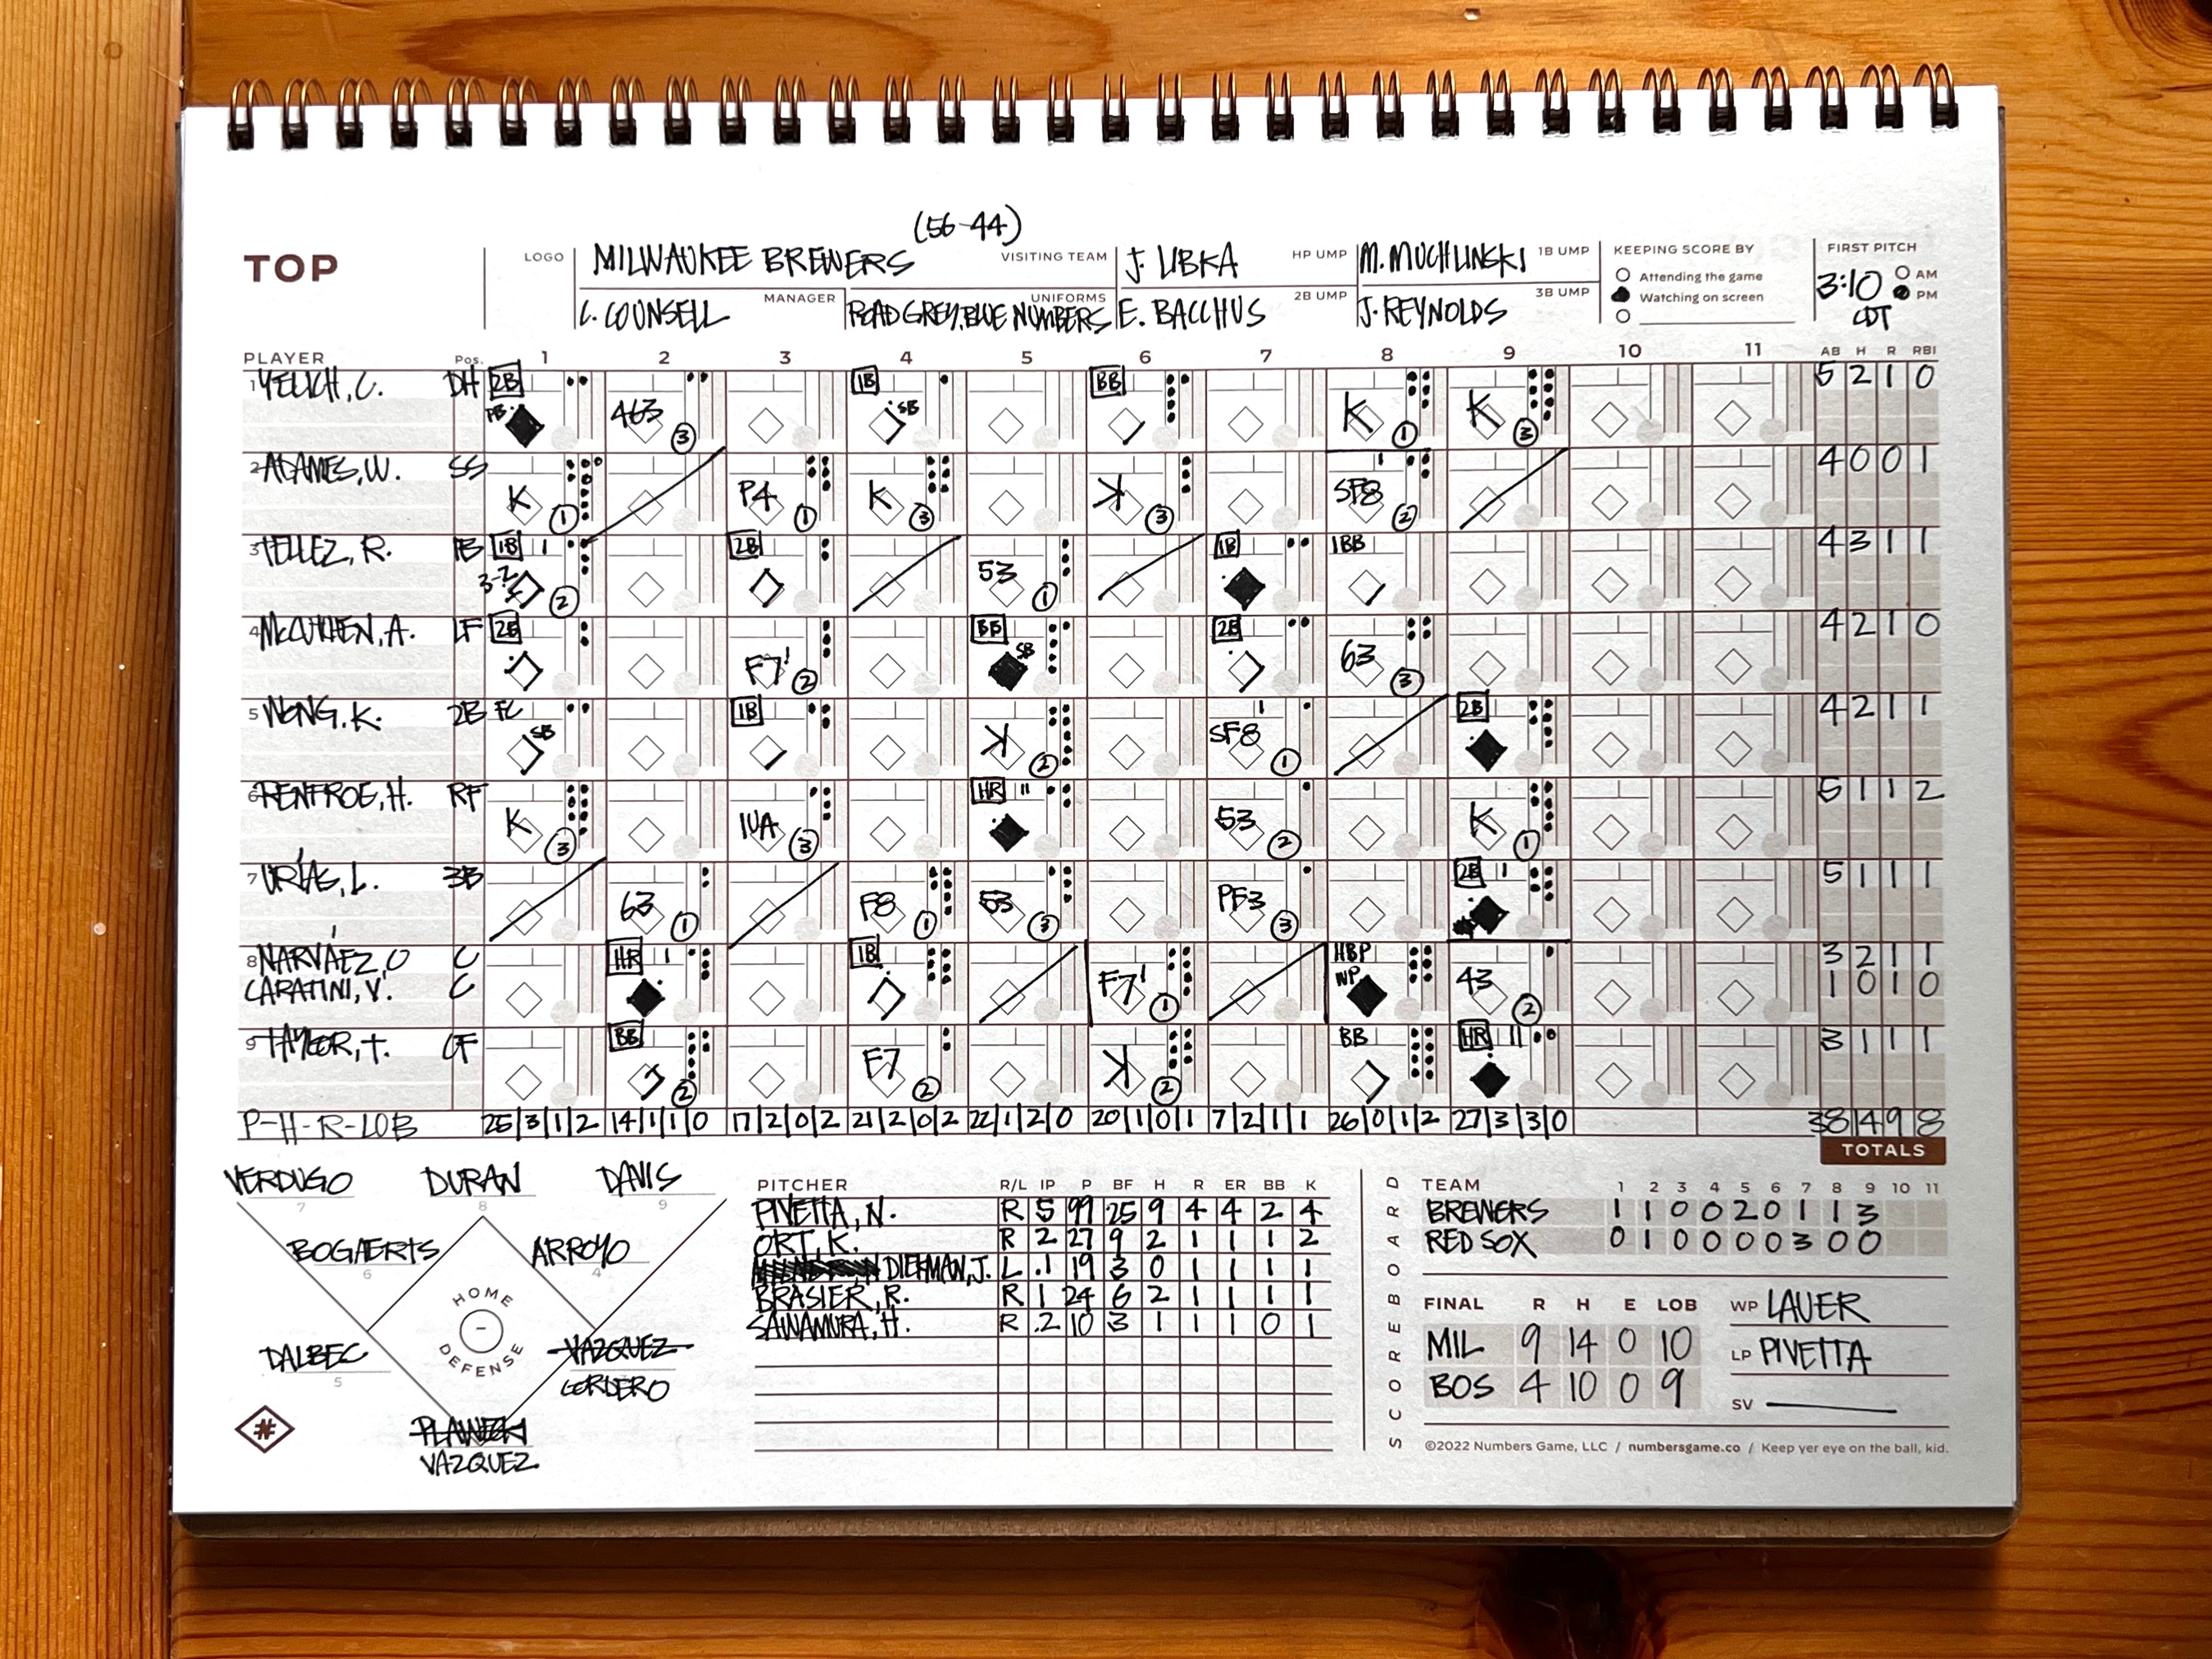 22 Scorebook First Edition Numbers Game